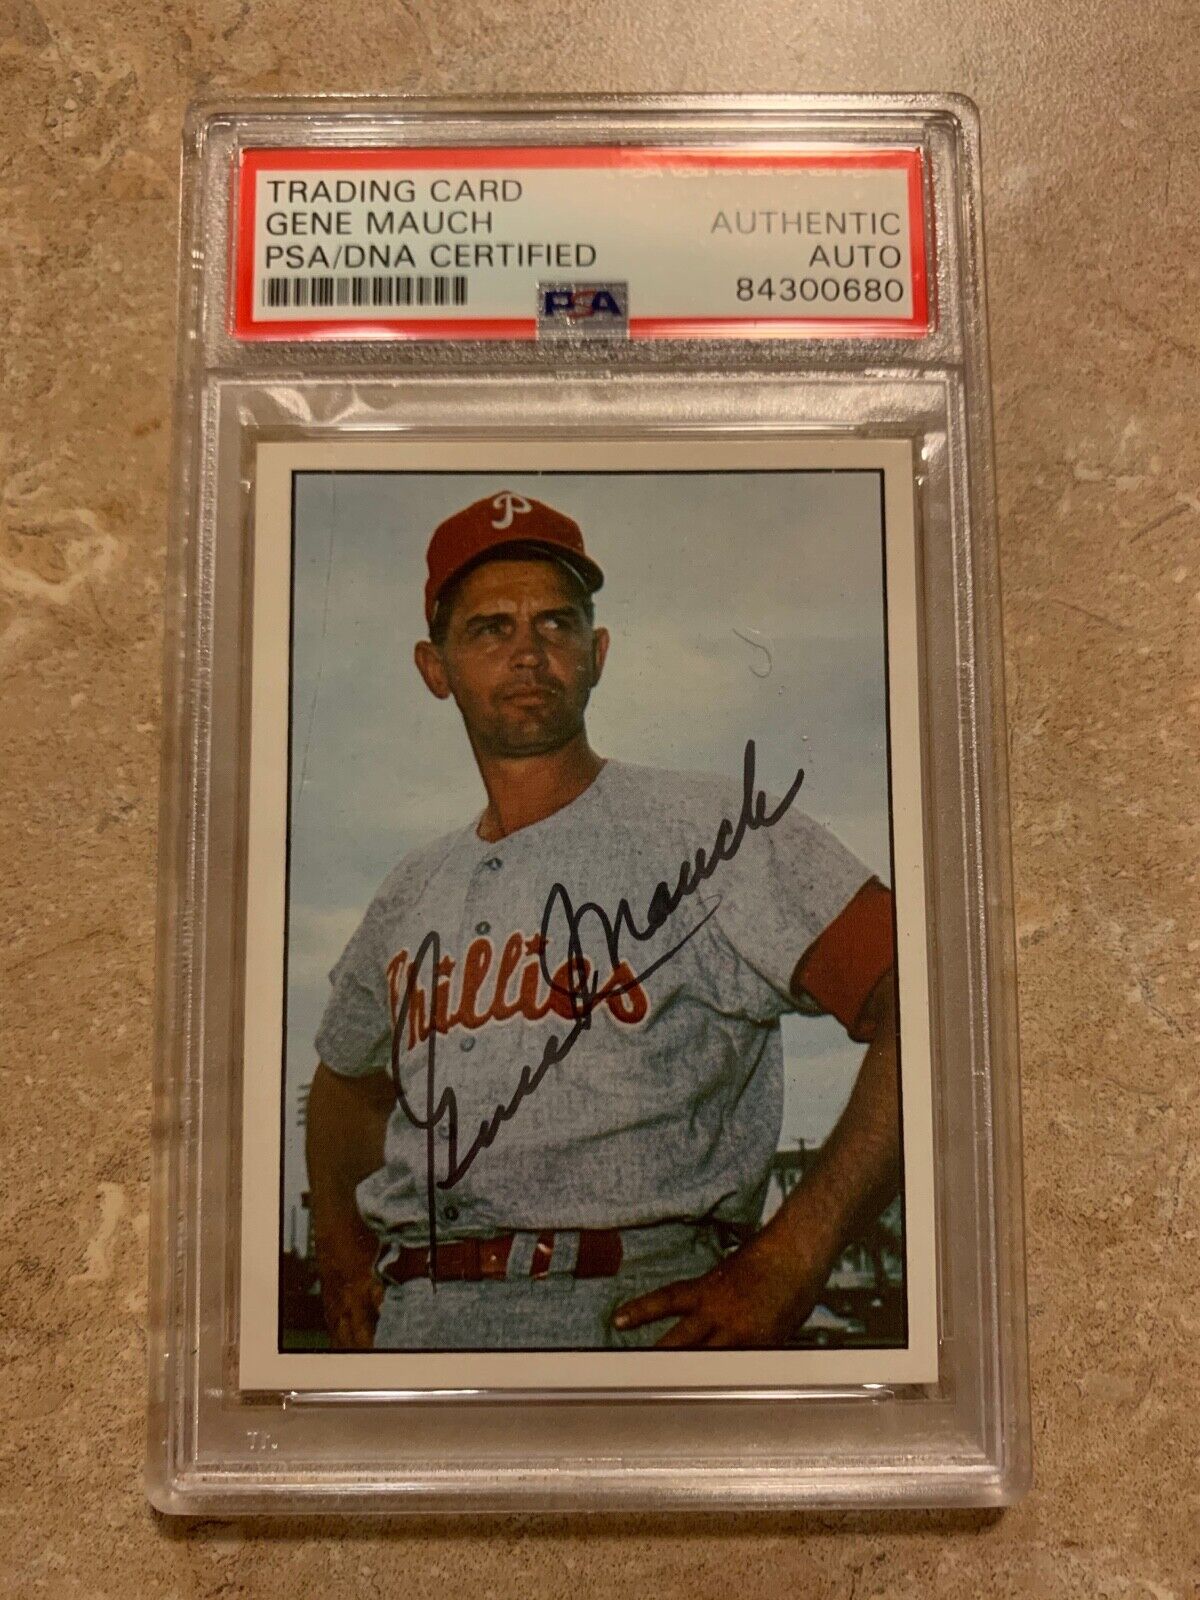 Gene Mauch Phillies Autographed 1981 TCMA Baseball Card PSA Certified Slabbed